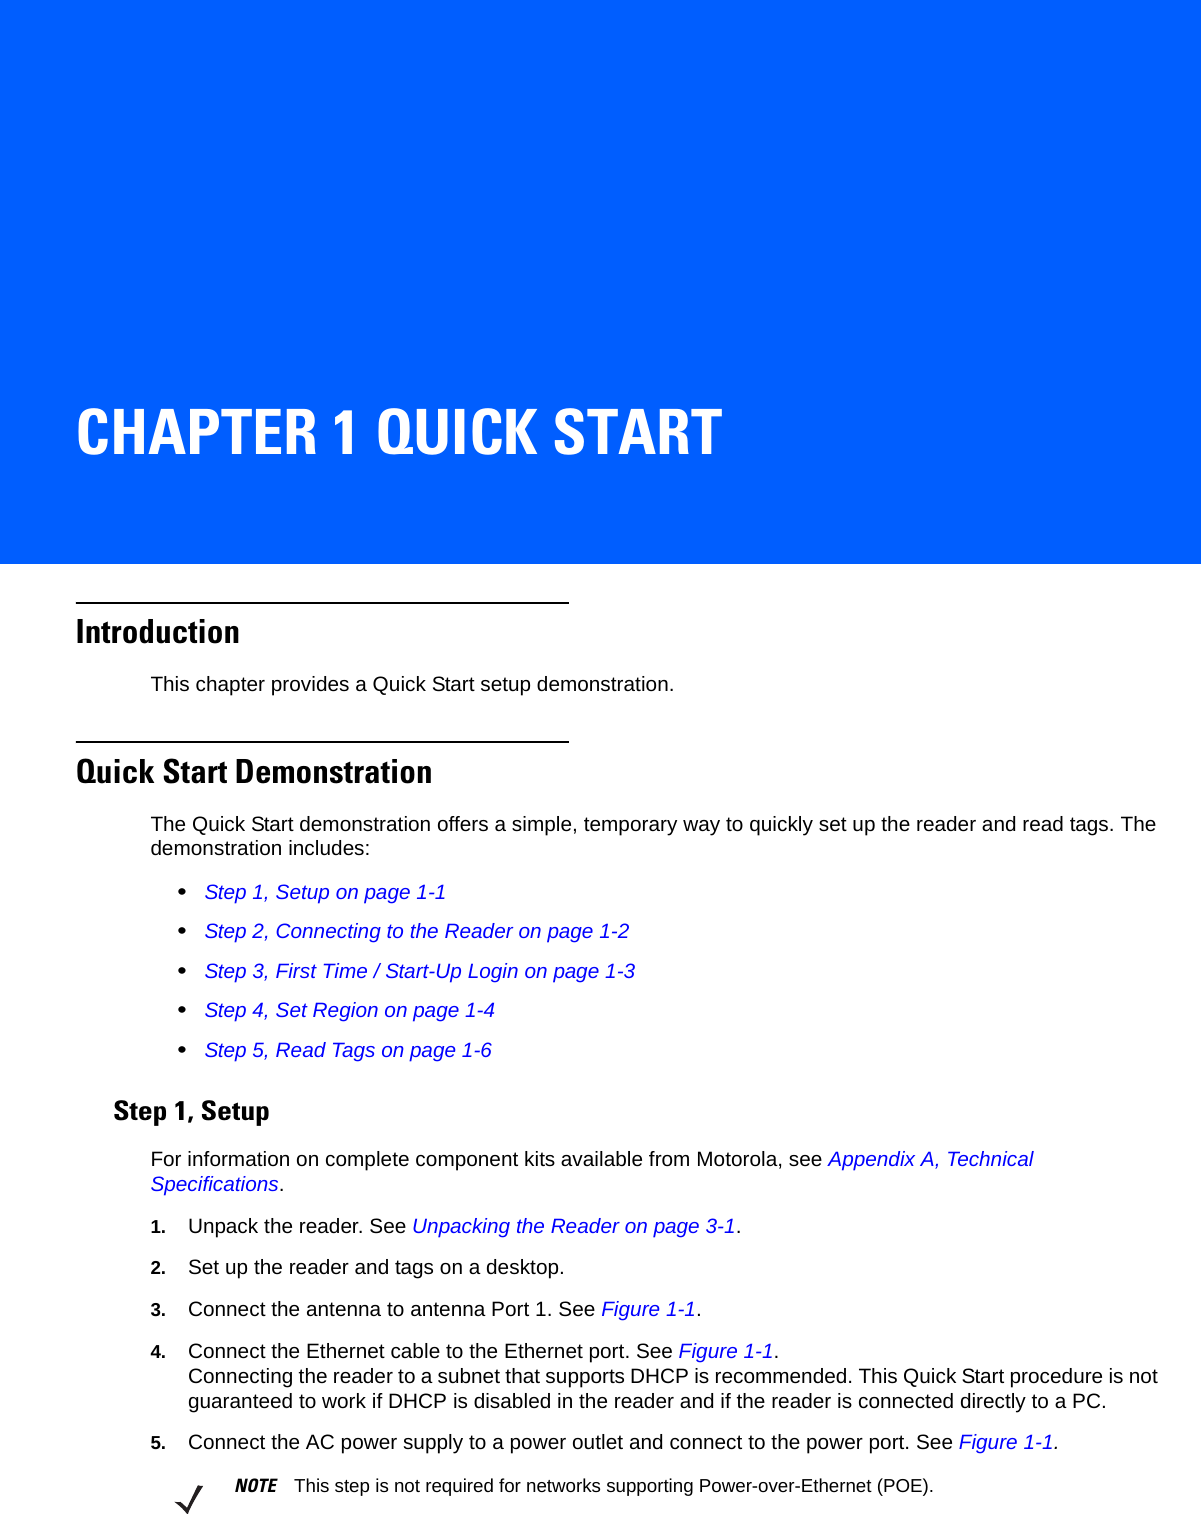 CHAPTER 1 QUICK STARTIntroductionThis chapter provides a Quick Start setup demonstration. Quick Start DemonstrationThe Quick Start demonstration offers a simple, temporary way to quickly set up the reader and read tags. The demonstration includes:•Step 1, Setup on page 1-1•Step 2, Connecting to the Reader on page 1-2•Step 3, First Time / Start-Up Login on page 1-3•Step 4, Set Region on page 1-4•Step 5, Read Tags on page 1-6Step 1, SetupFor information on complete component kits available from Motorola, see Appendix A, Technical Specifications.1. Unpack the reader. See Unpacking the Reader on page 3-1.2. Set up the reader and tags on a desktop. 3. Connect the antenna to antenna Port 1. See Figure 1-1.4. Connect the Ethernet cable to the Ethernet port. See Figure 1-1.Connecting the reader to a subnet that supports DHCP is recommended. This Quick Start procedure is not guaranteed to work if DHCP is disabled in the reader and if the reader is connected directly to a PC.5. Connect the AC power supply to a power outlet and connect to the power port. See Figure 1-1. NOTE This step is not required for networks supporting Power-over-Ethernet (POE).